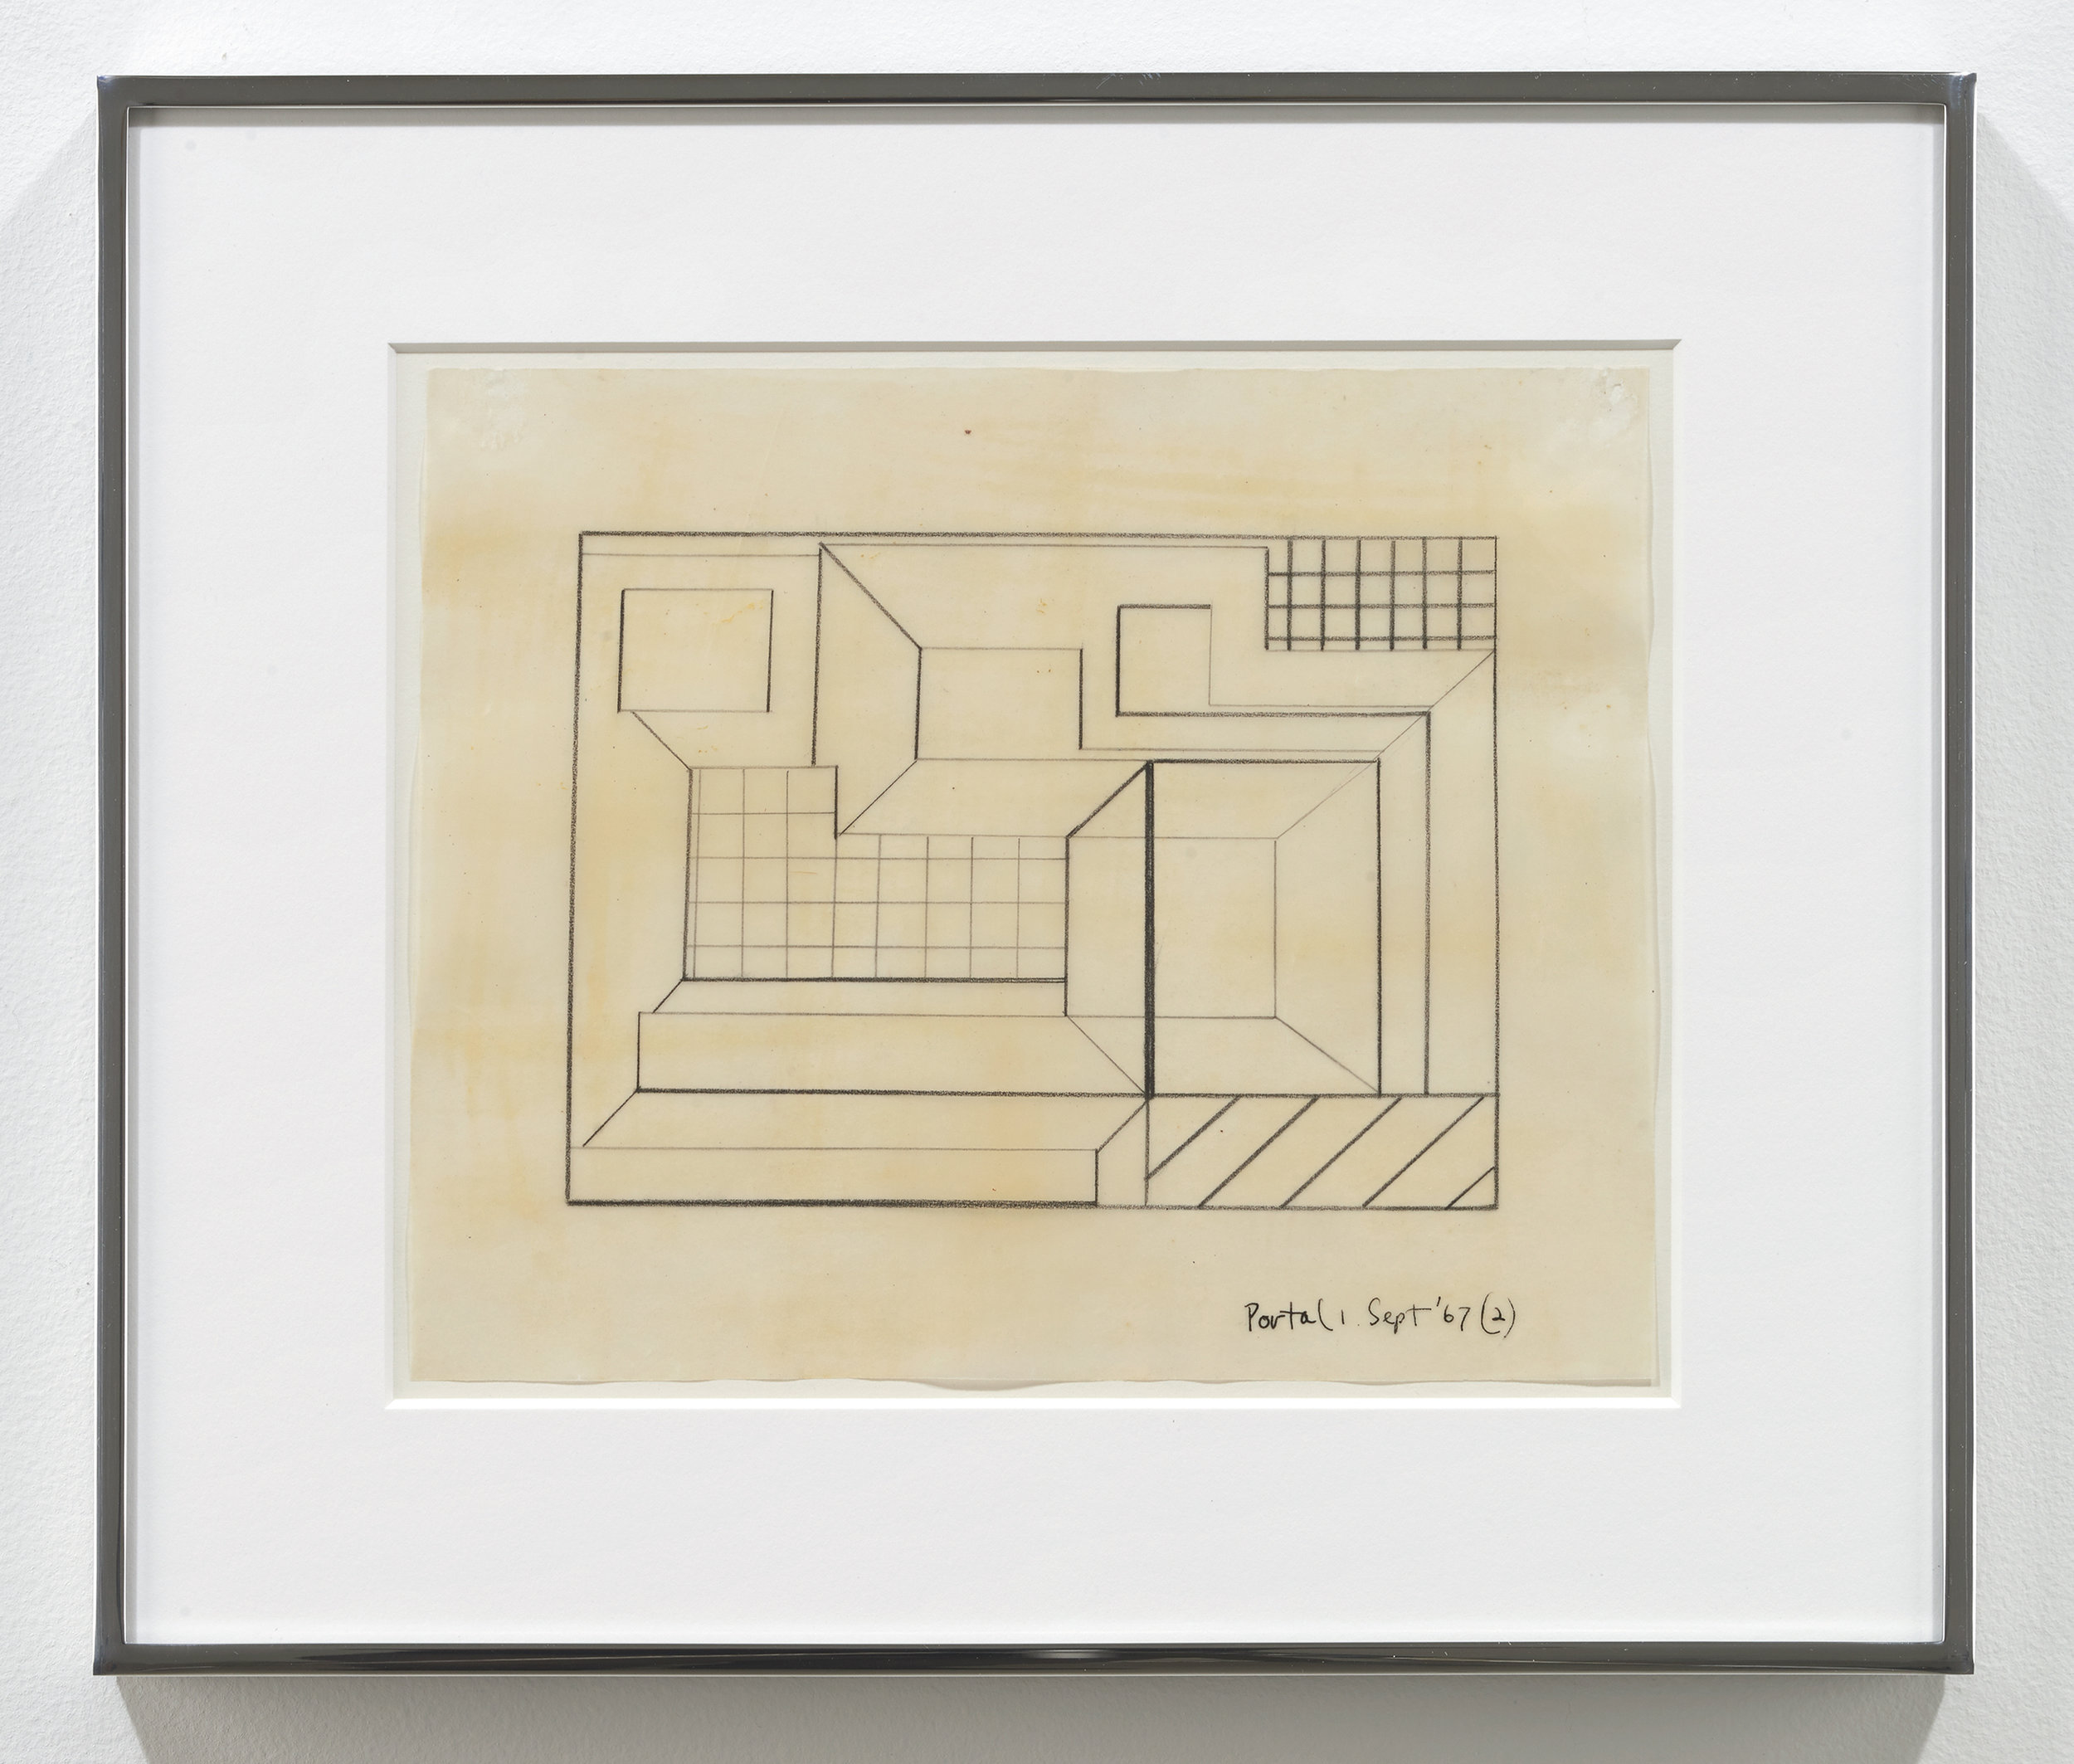  Suzanne Blank Redstone,  Drawing for Portal 1 #2 , 1967, Paper, tracing paper, pencil, Framed dimensions: 11 x 13 inches 